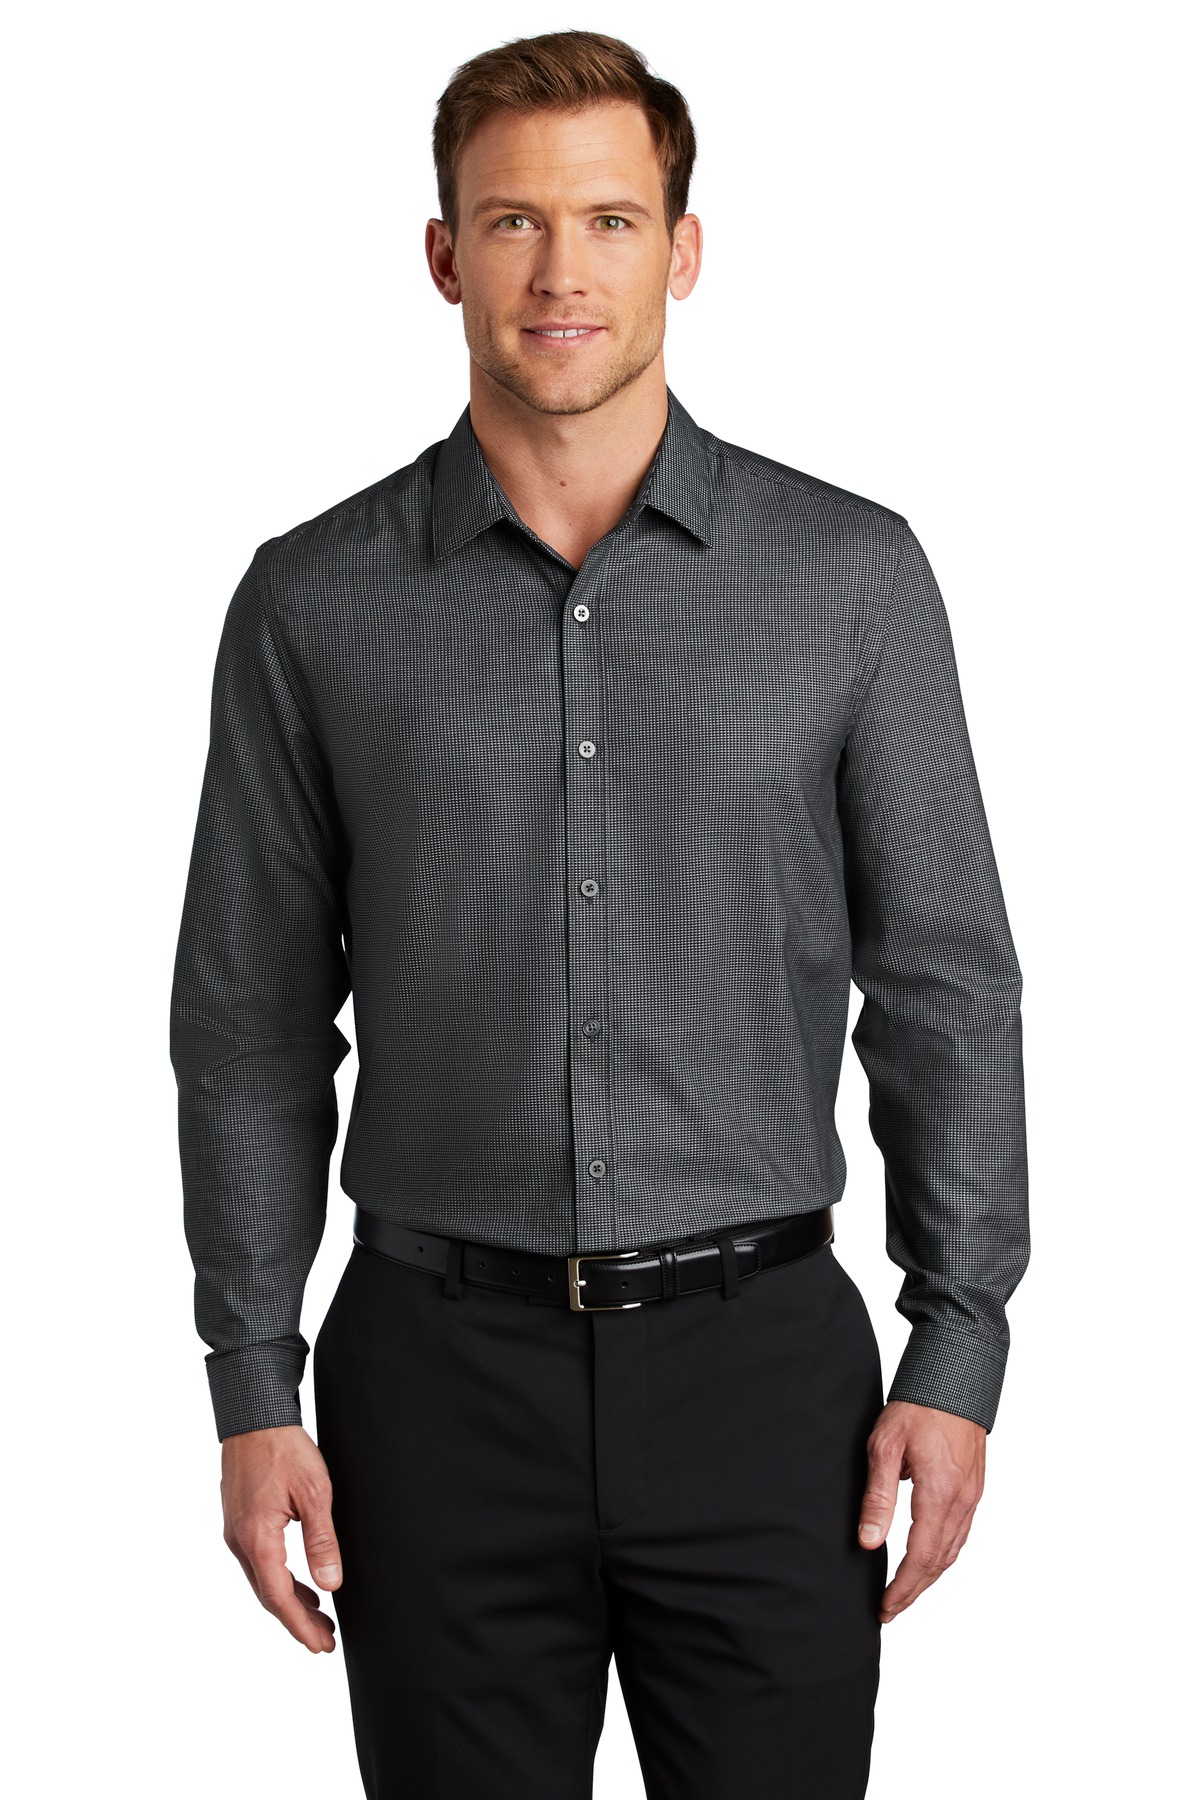 Port Authority Pincheck Easy Care Shirt-Port Authority